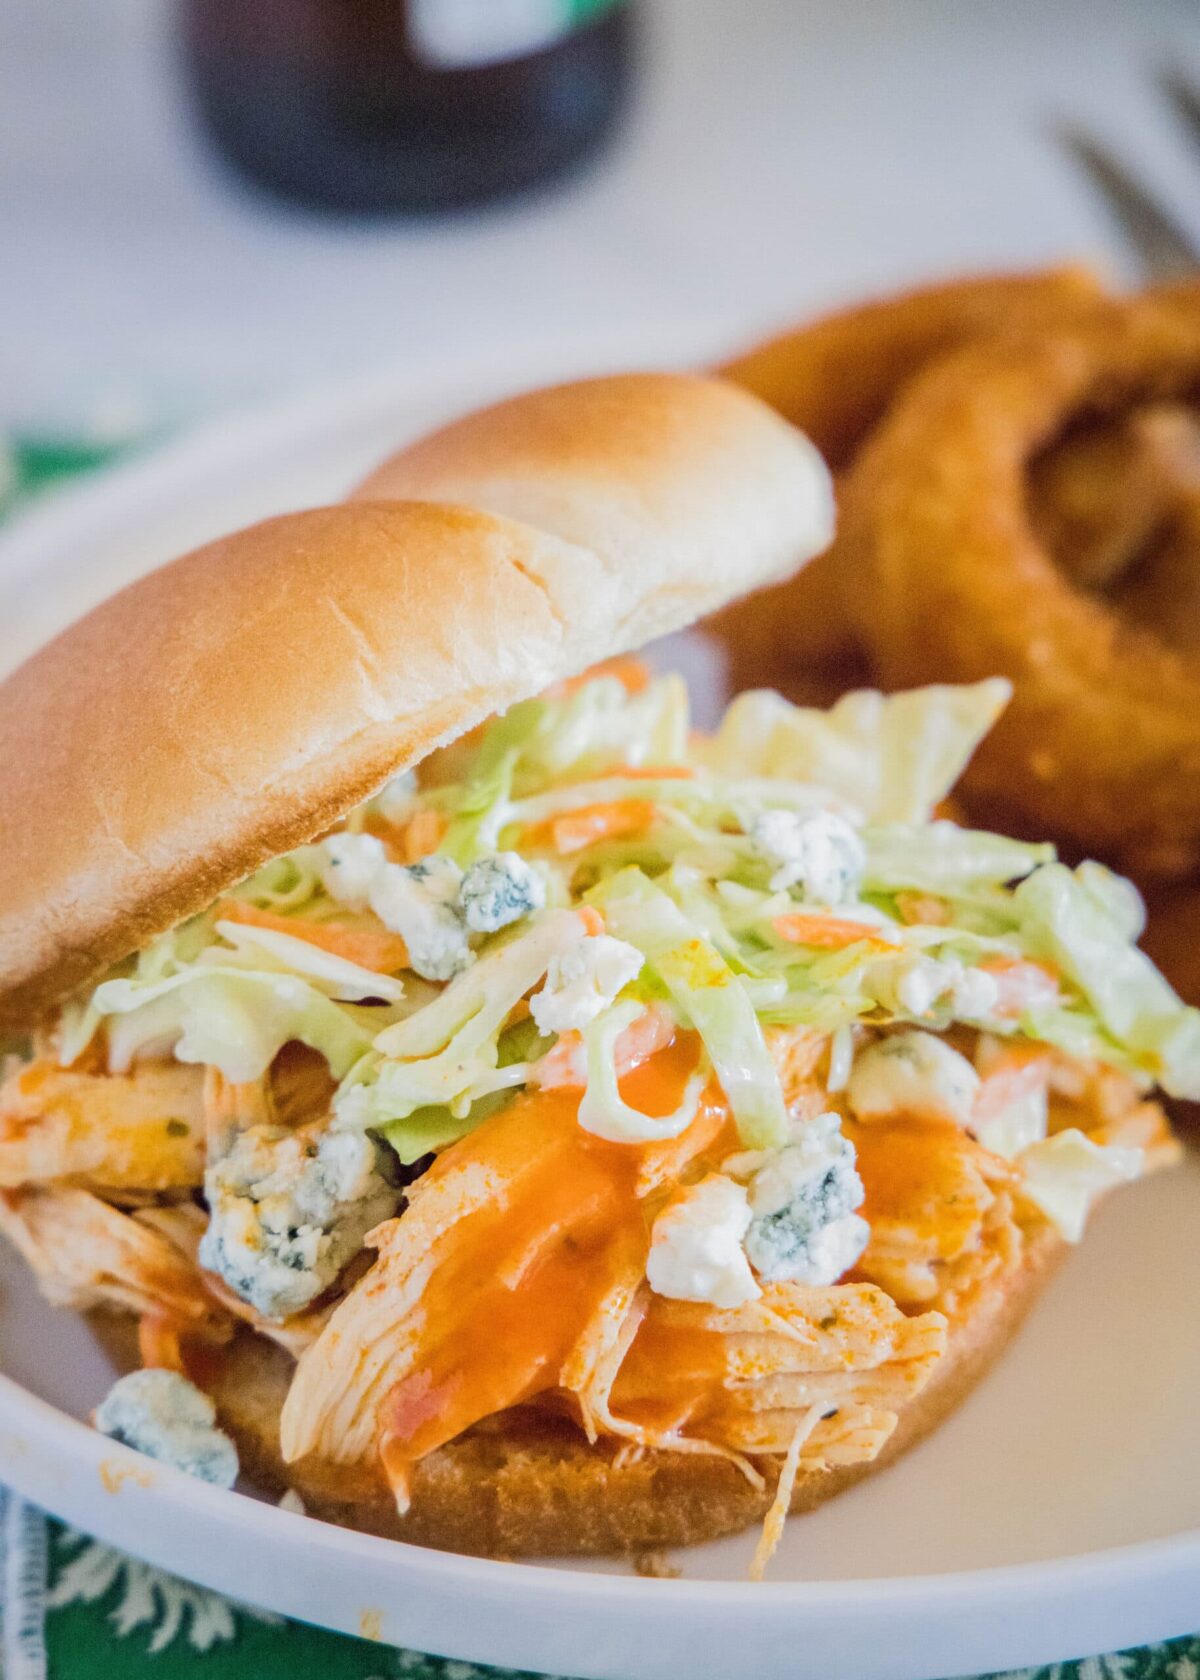 A chicken sandwich topped with coleslaw and blue cheese, on a plate, with onion rings in the background